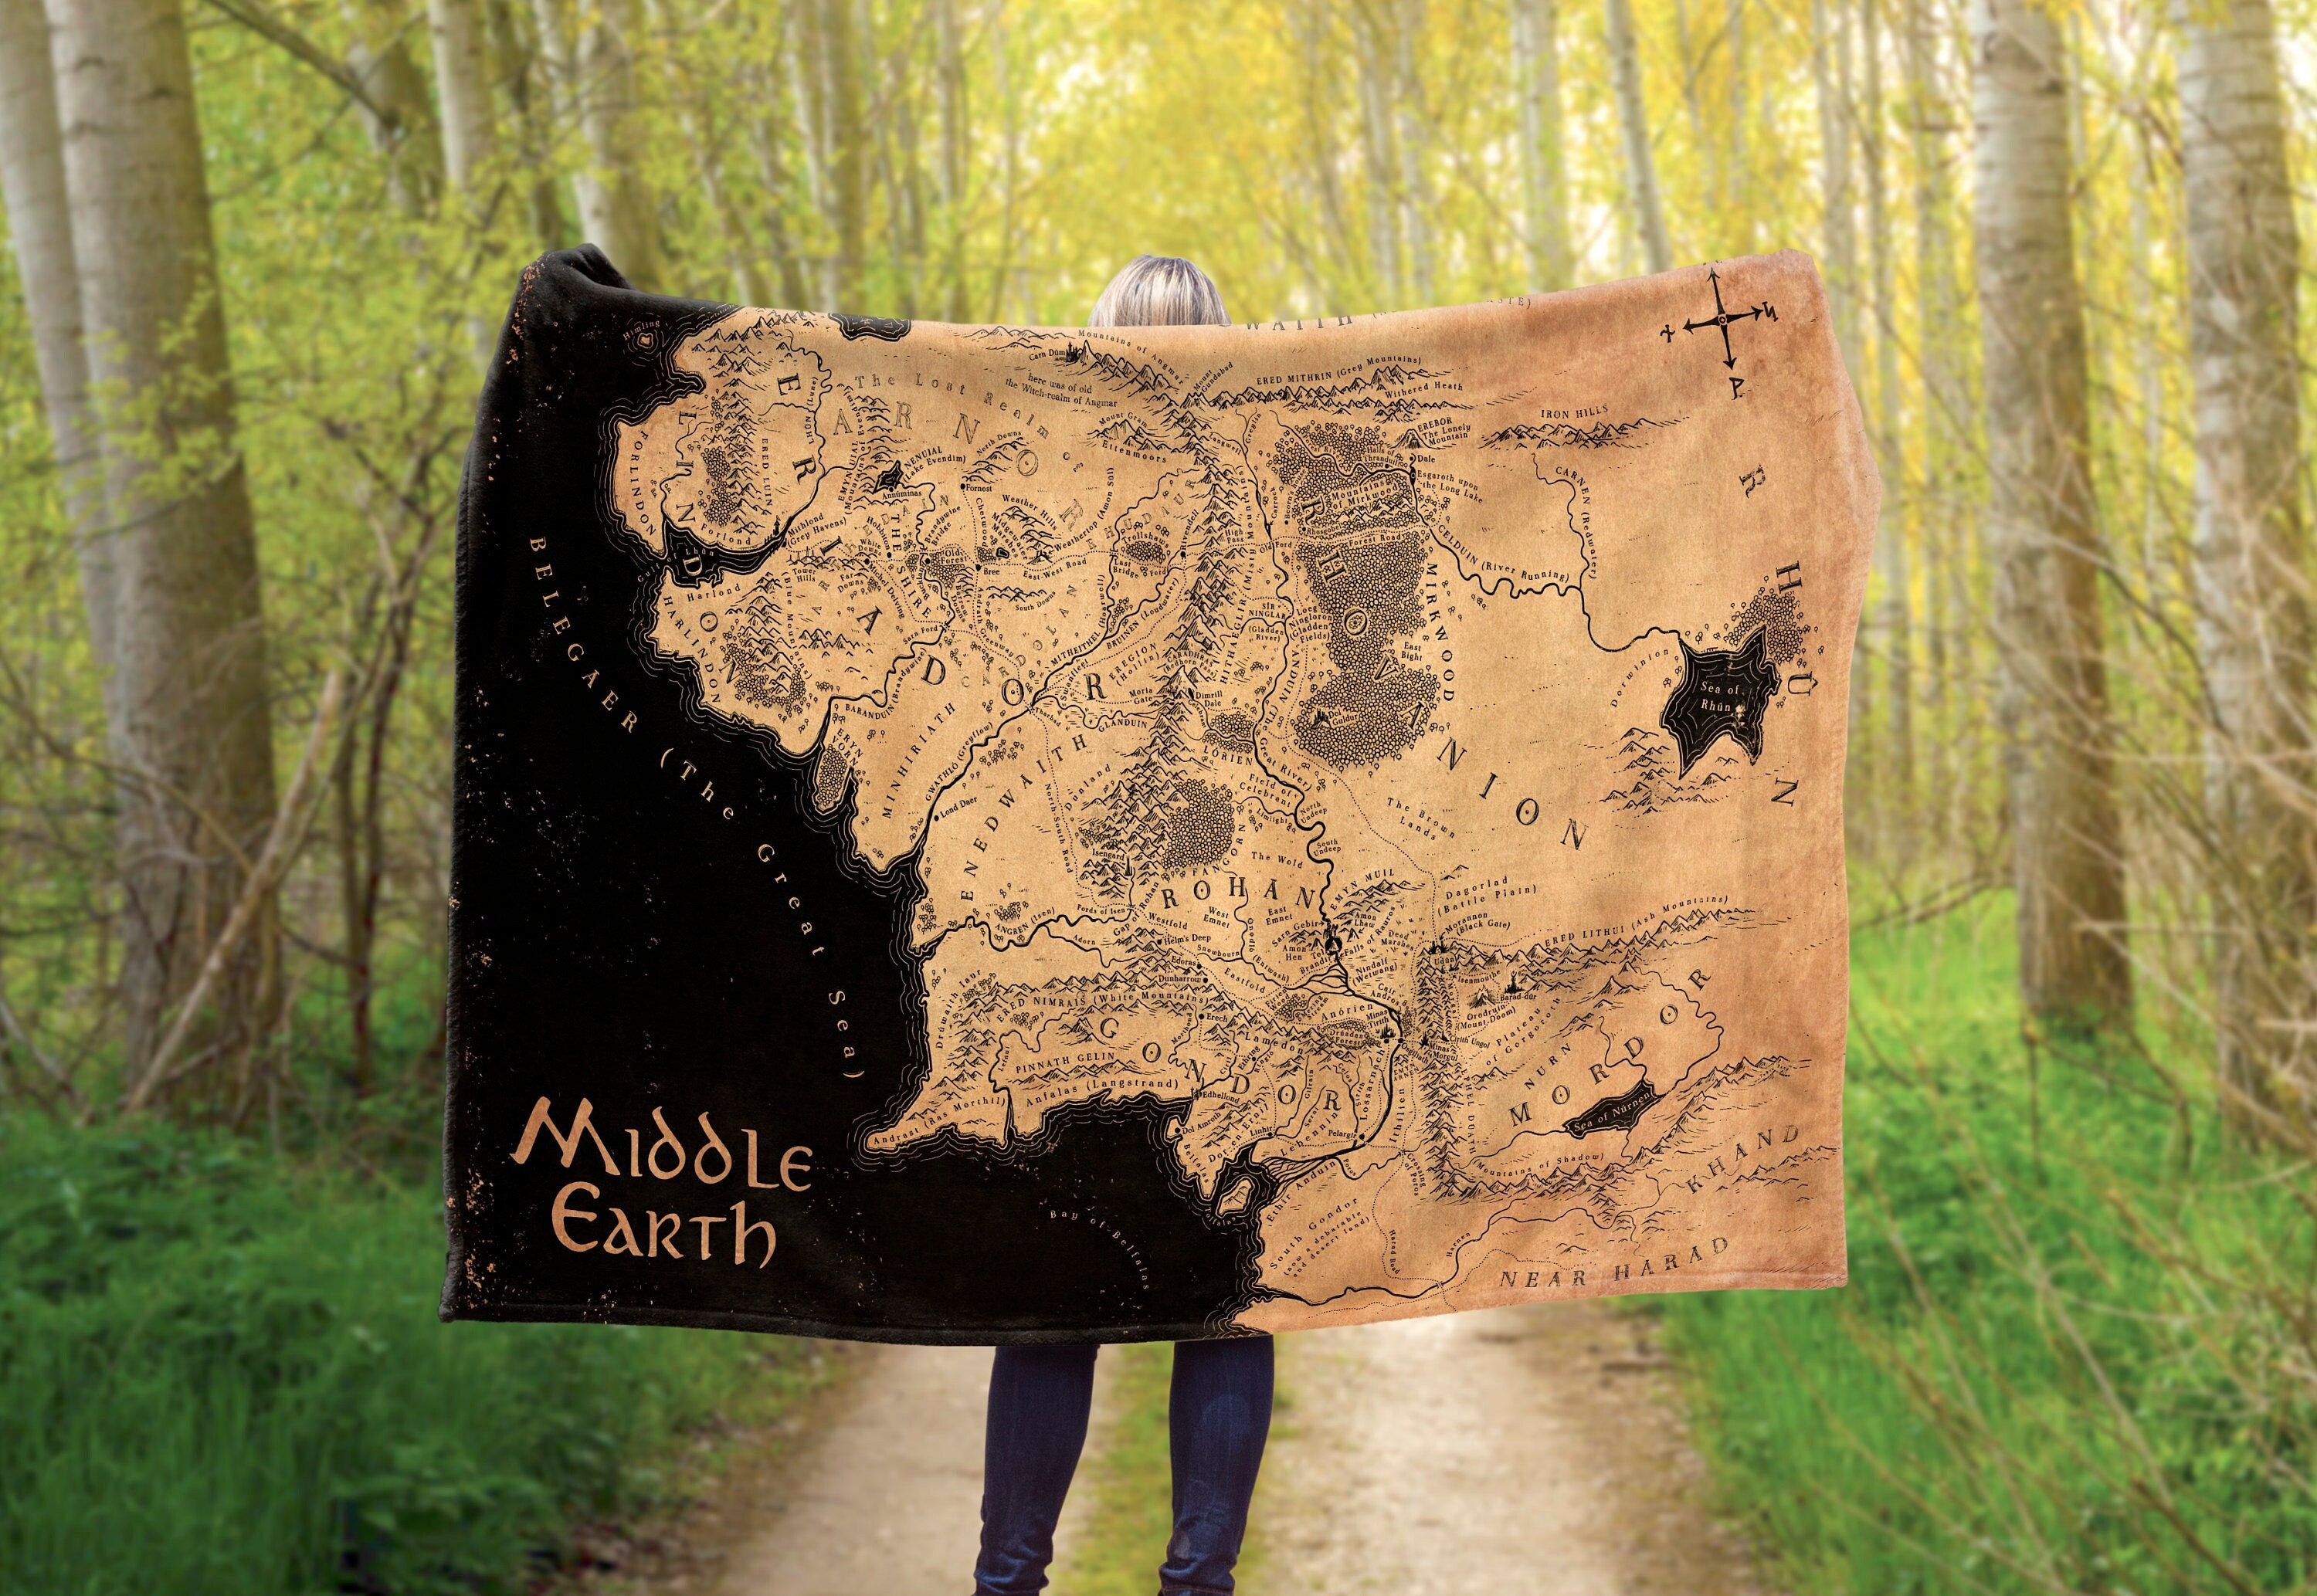 Lord Of The Rings Full Middle Earth Map Design Plush Throw Blanket 46' x 60